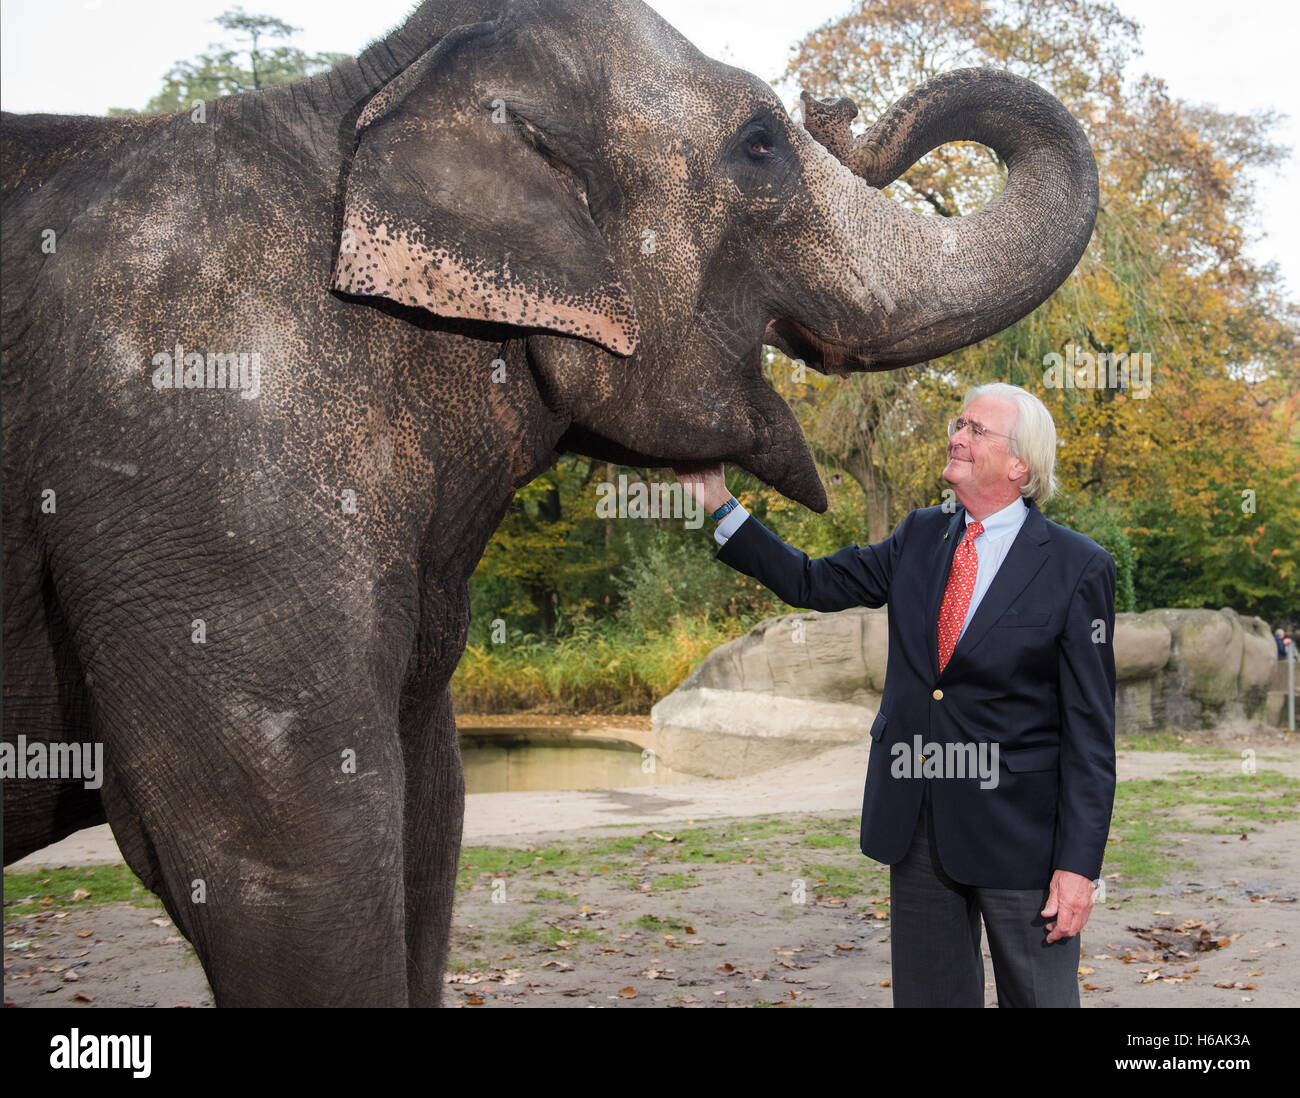 Hamburg, Germany. 26th Oct, 2016. The great-grandson of the founder of the zoo in Hamburg-Stellingen, today called Hagenbecks Tierpark, Carl Claus Hagenbeck, smiles next to elephant Shandra in Hagenbecks Tierpark in Hamburg, Germany, 26 October 2016. On 01 November 2016 Hagenbeck is celebrating his 75th birthday. Photo: DANIEL BOCKWOLDT/dpa/Alamy Live News Stock Photo